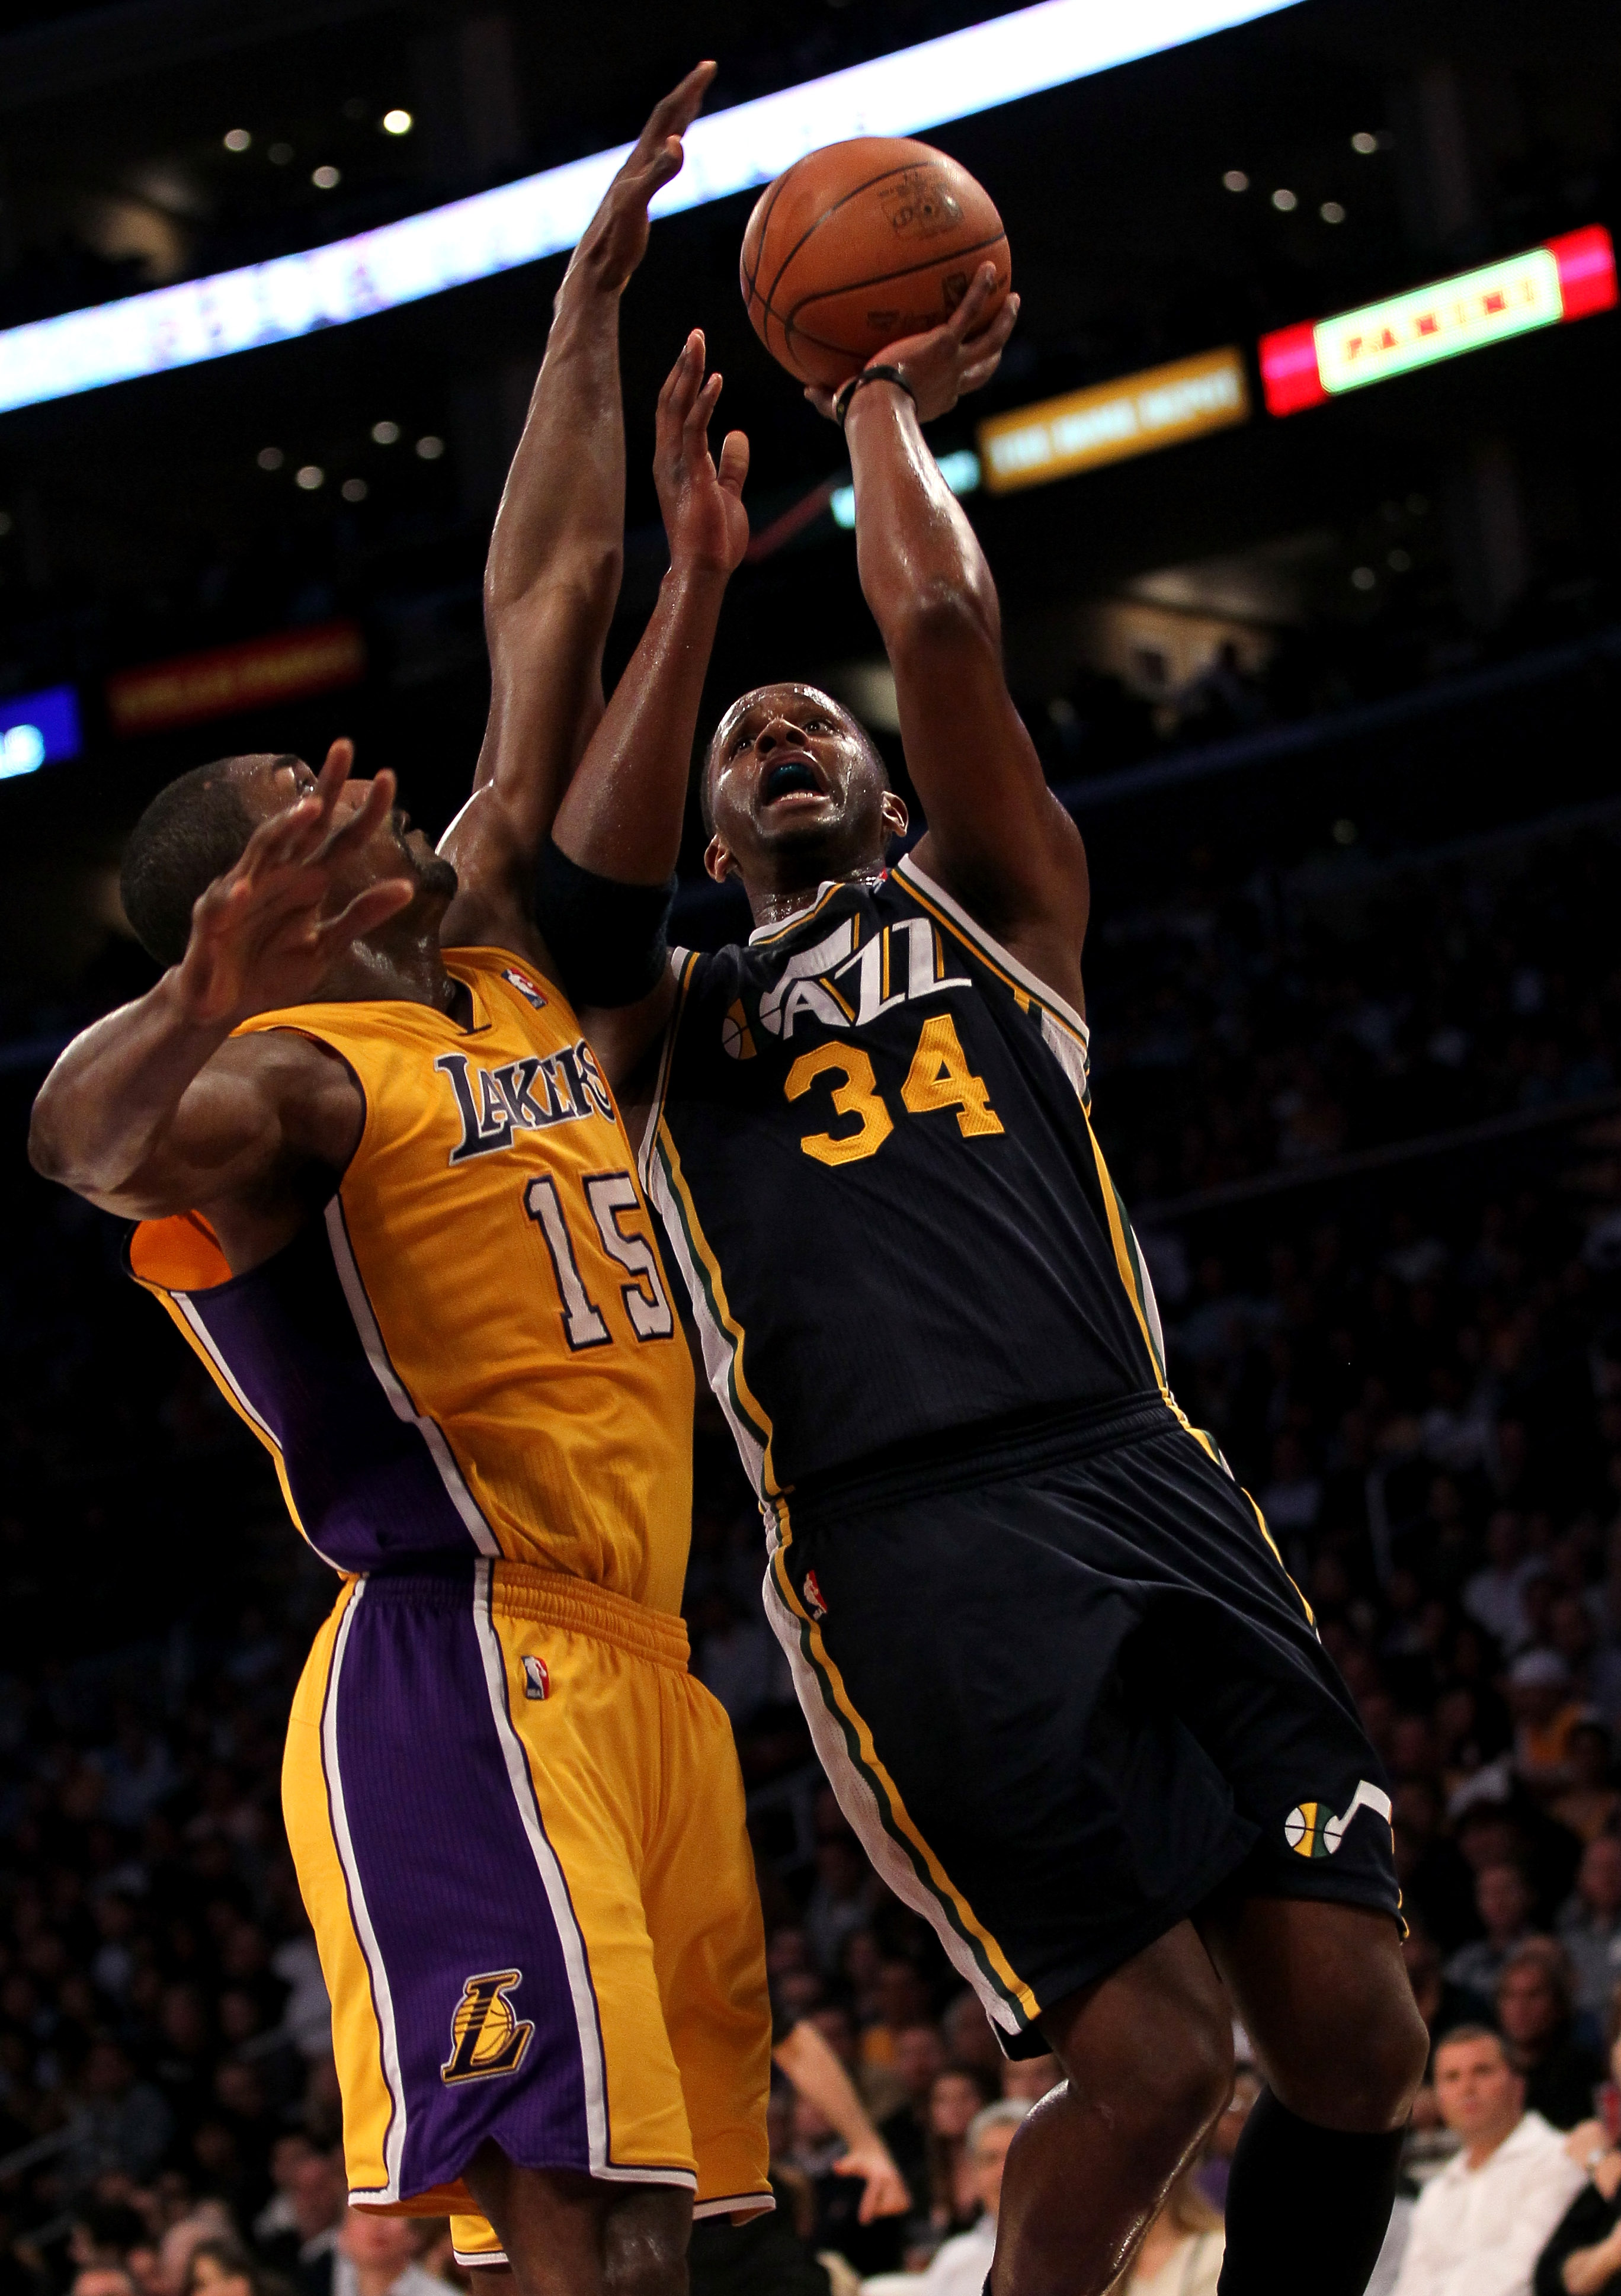 LOS ANGELES, CA - APRIL 05:  C.J. Miles #34 of the Utah Jazz goes up for a shot against Ron Artest #15 of the Los Angeles Lakers at Staples Center on April 5, 2011 in Los Angeles, California.  NOTE TO USER: User expressly acknowledges and agrees that, by